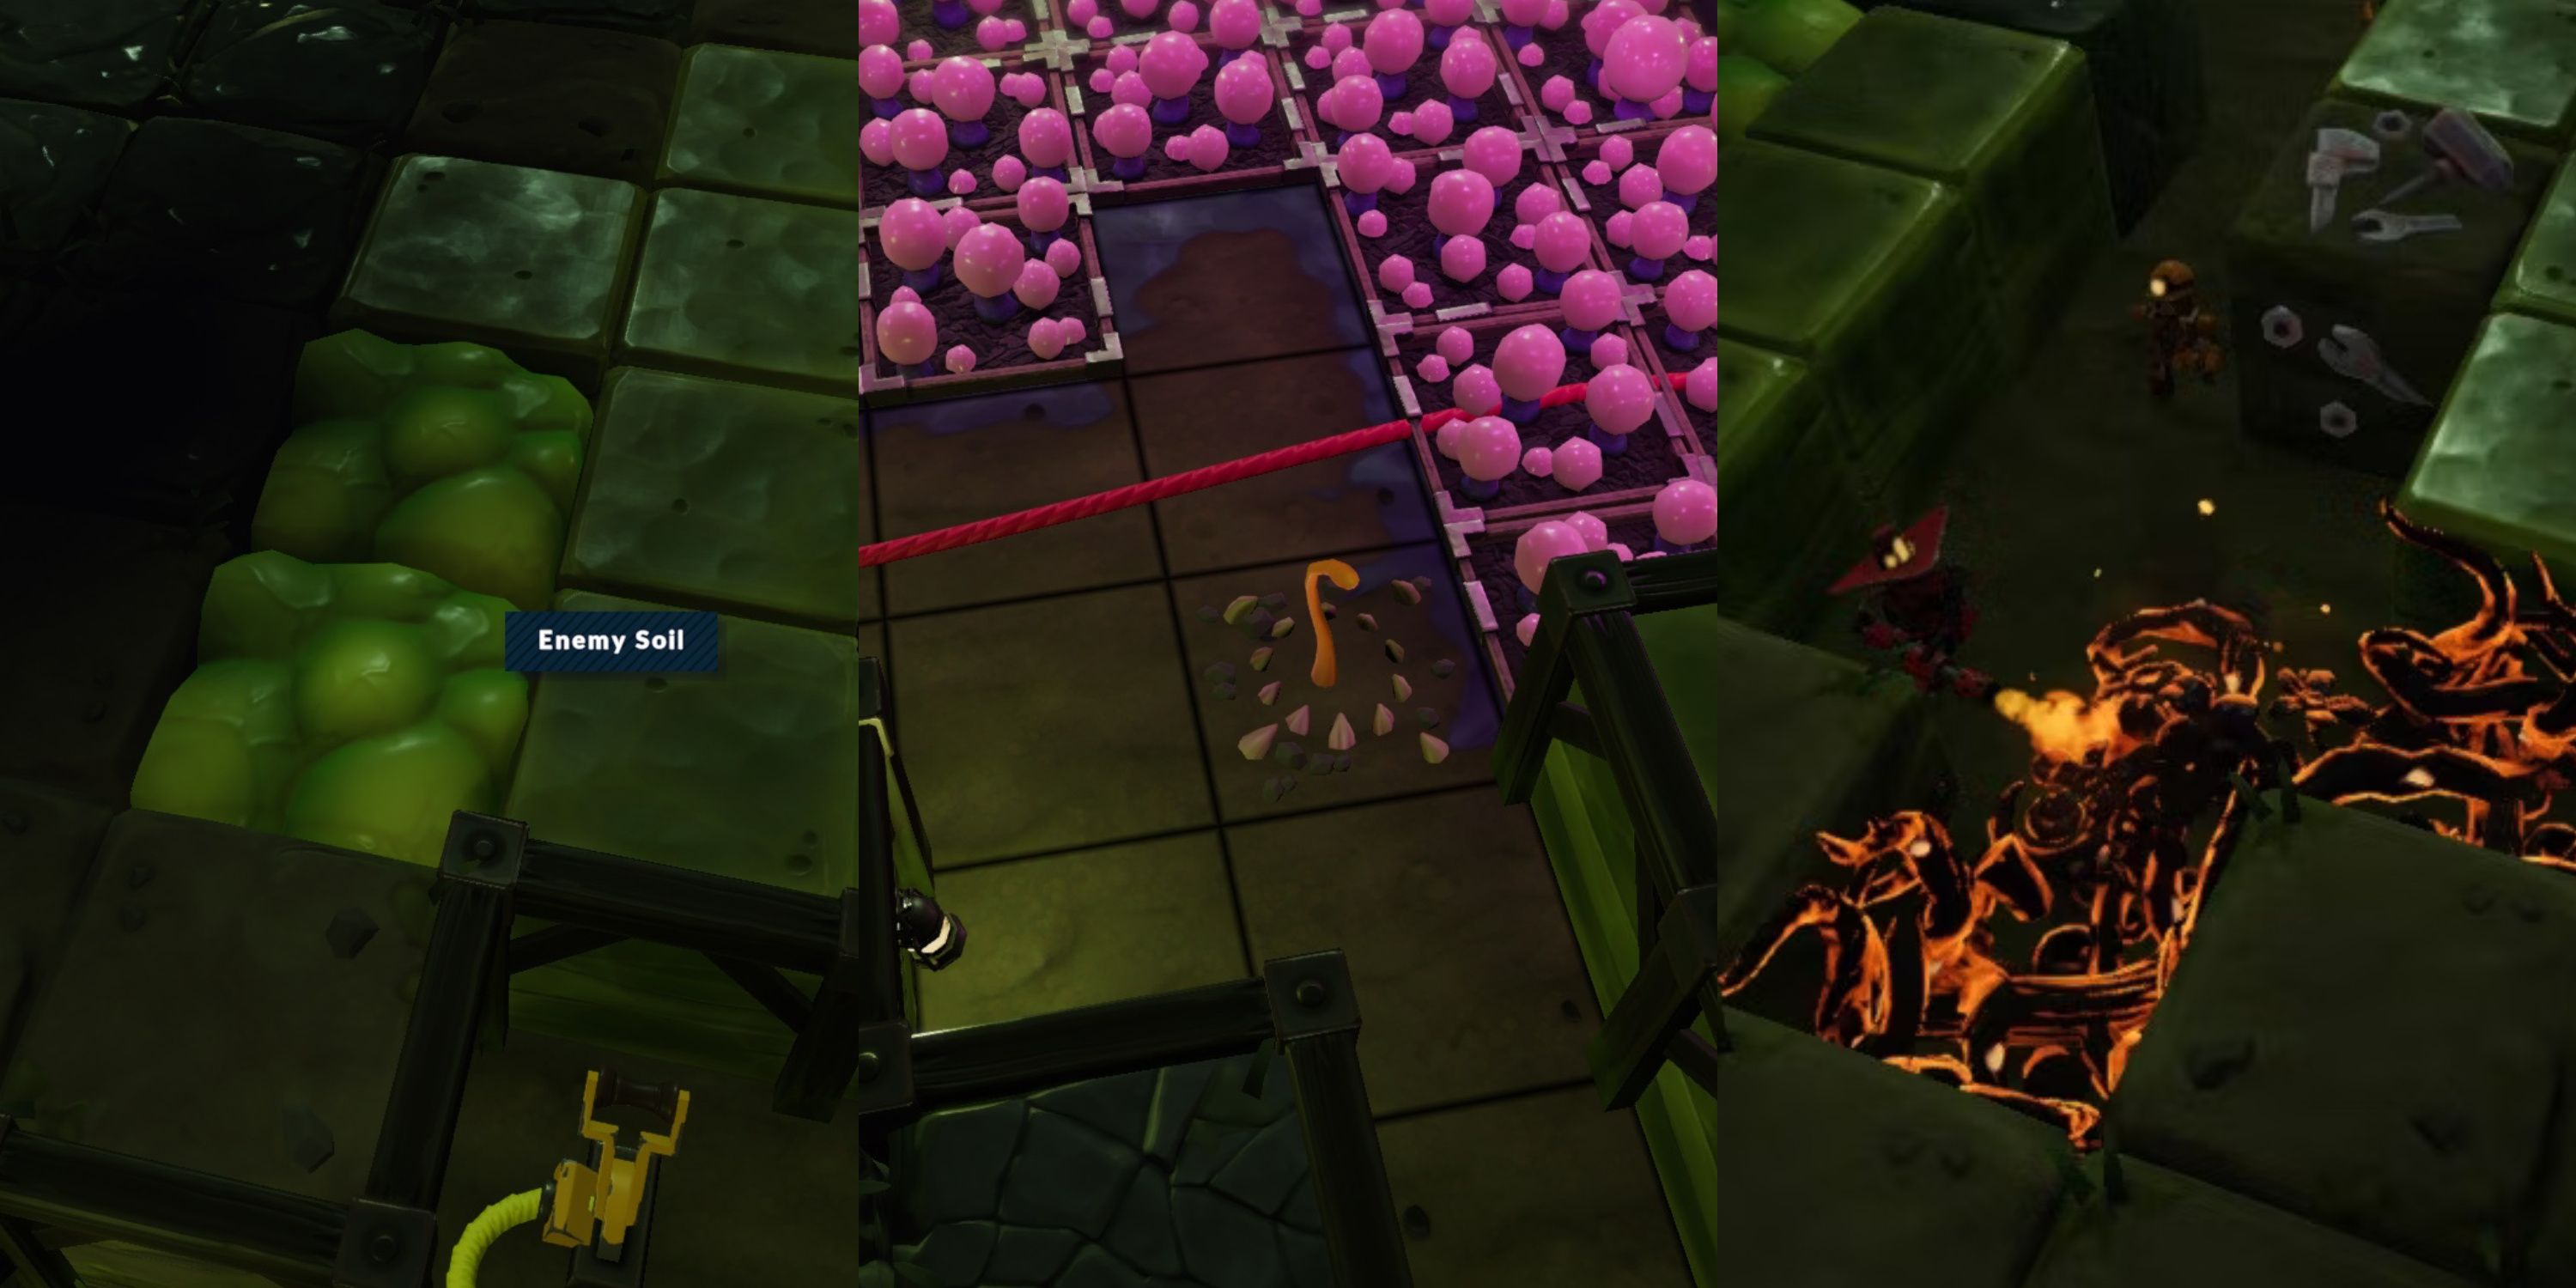 Left to right: Enemy blocks, a Worm Den, Creep being set on fire